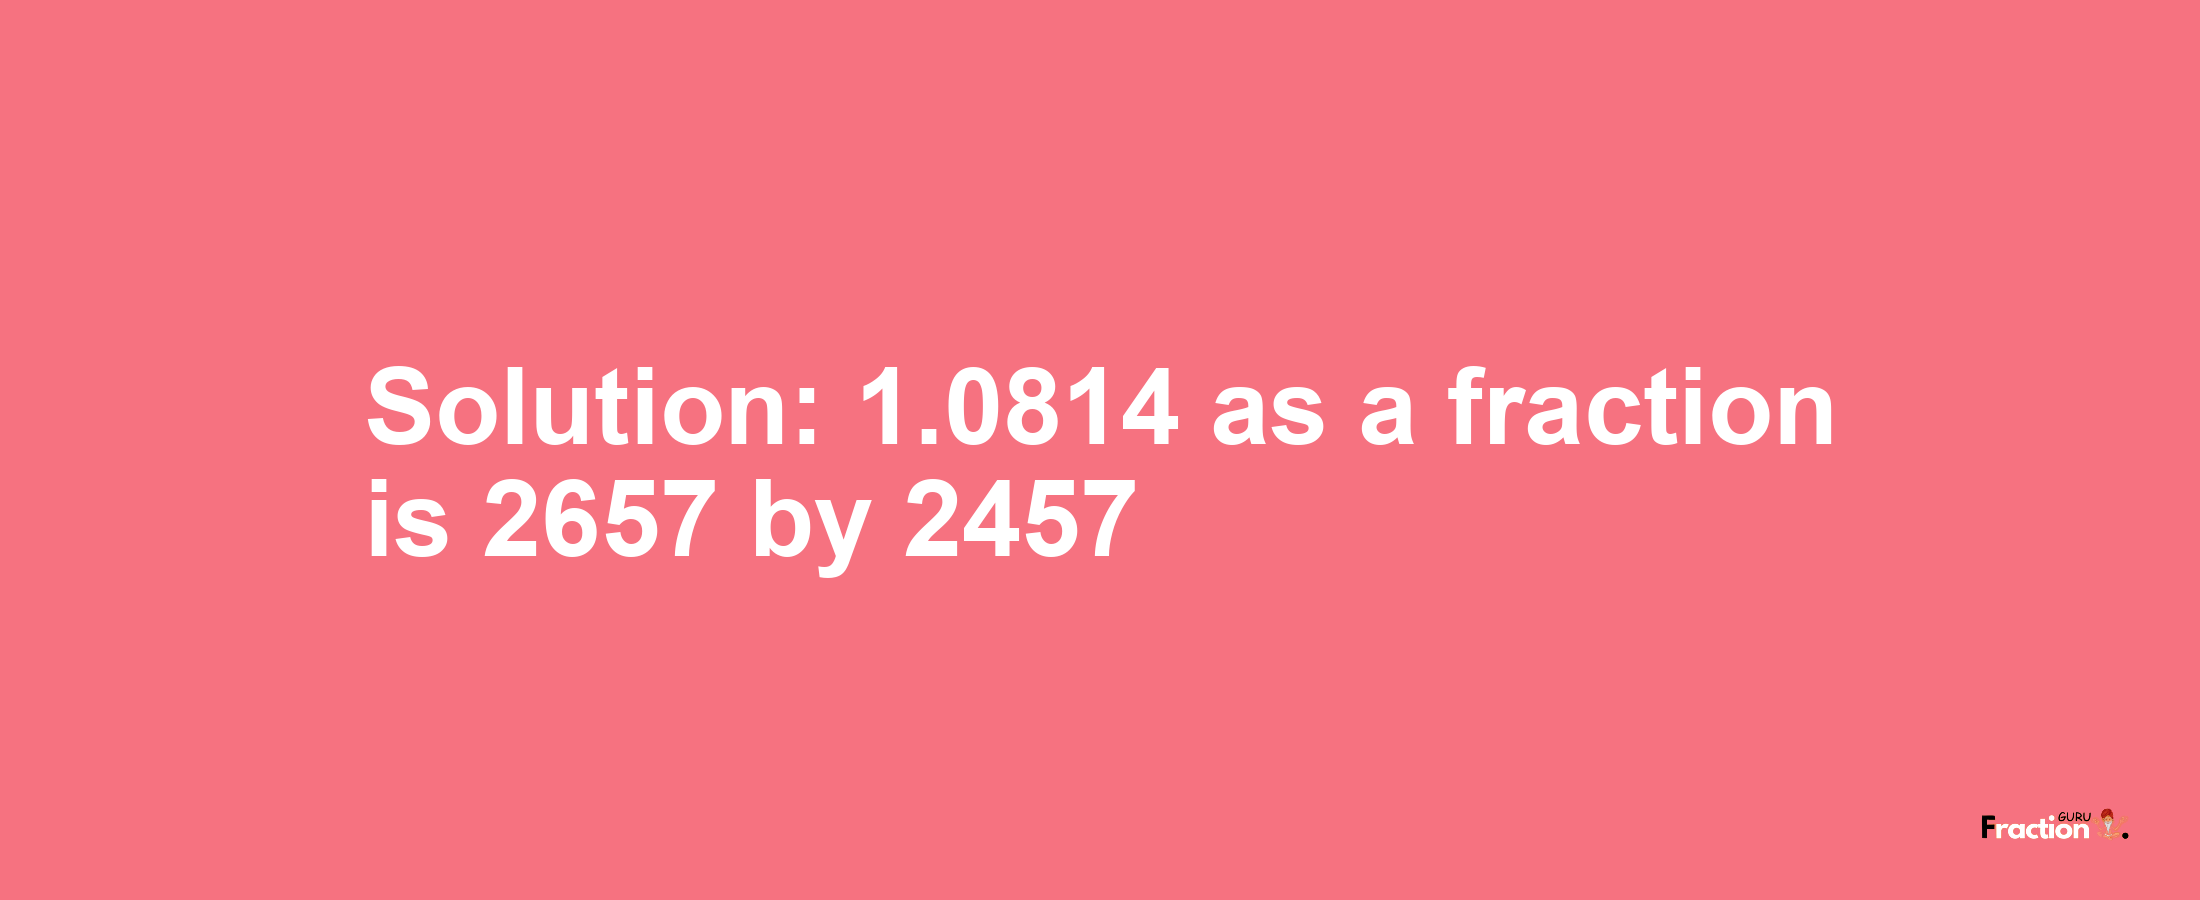 Solution:1.0814 as a fraction is 2657/2457